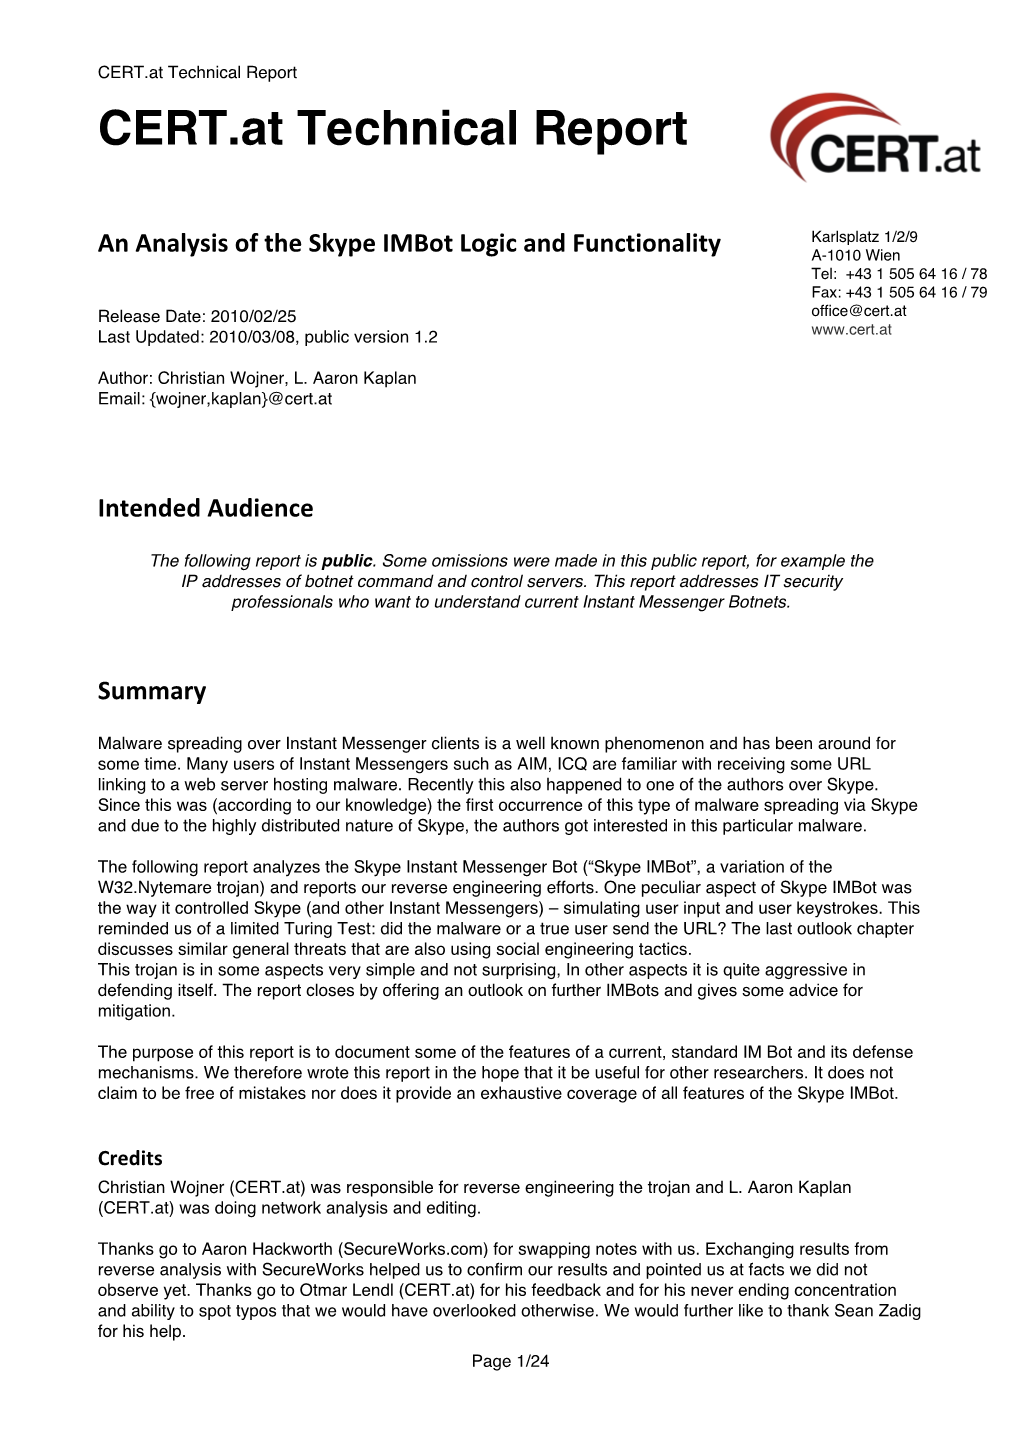 CERT.At Technical Report an Analysis of the Skype Imbot Logic And